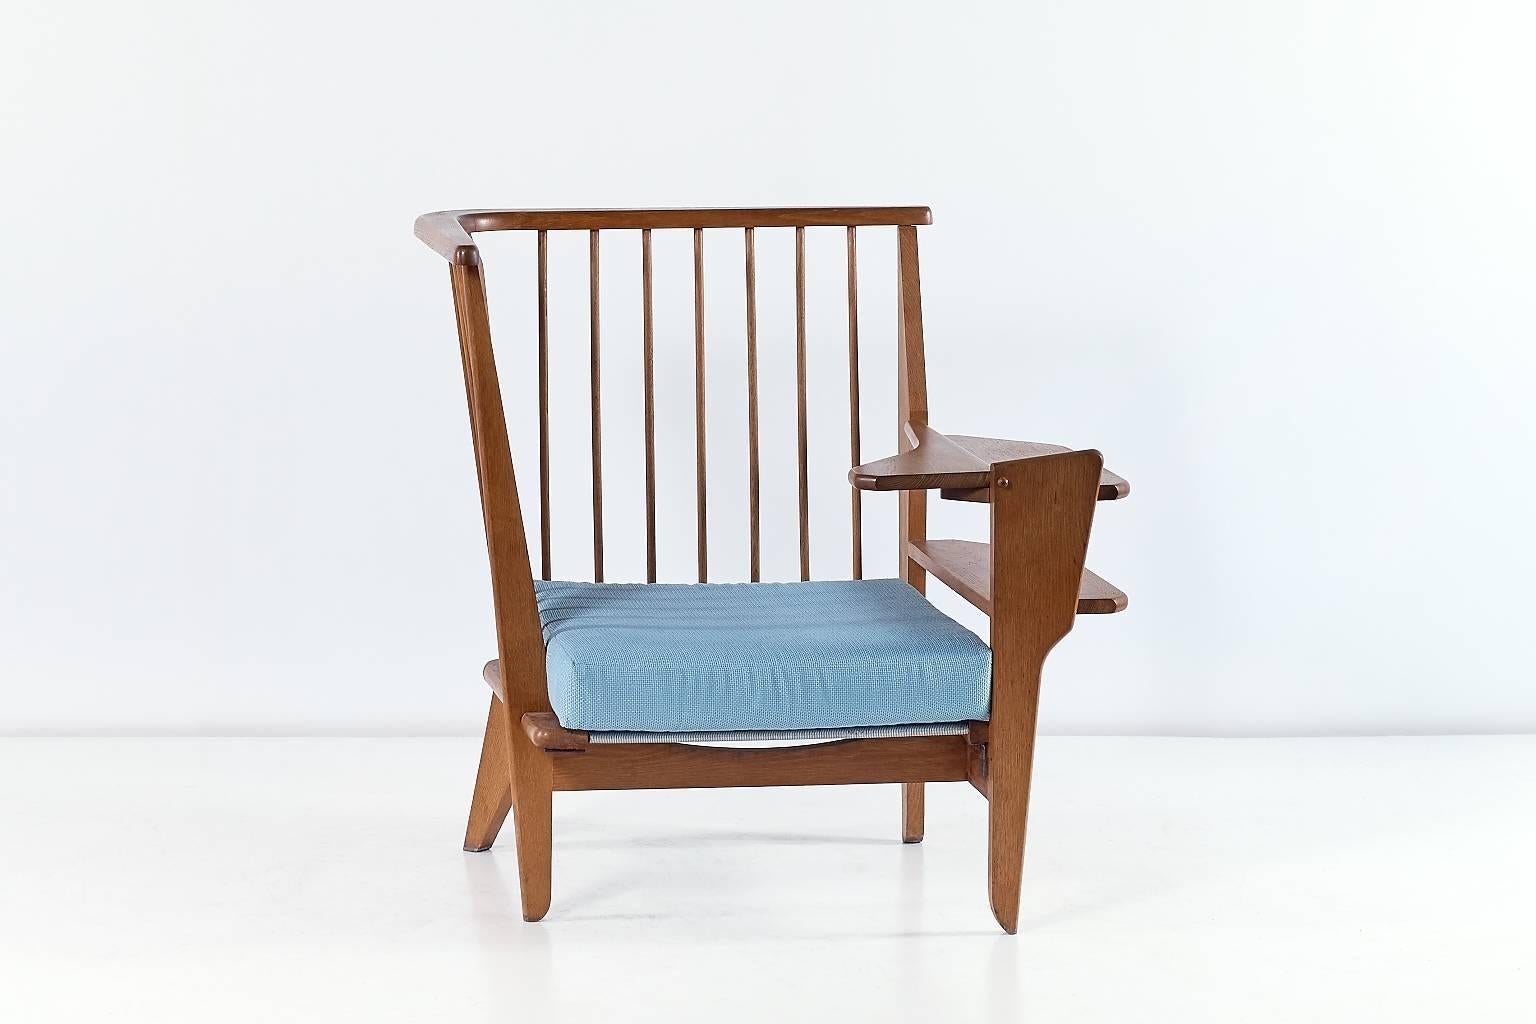 A rare and unusual corner chair in solid oak designed by Robert Guillerme and Jacques Chambron in the 1960s. This inventive chair with a single armrest offers remarkable details such as the sculpturally formed legs, the wooden slats on the side and